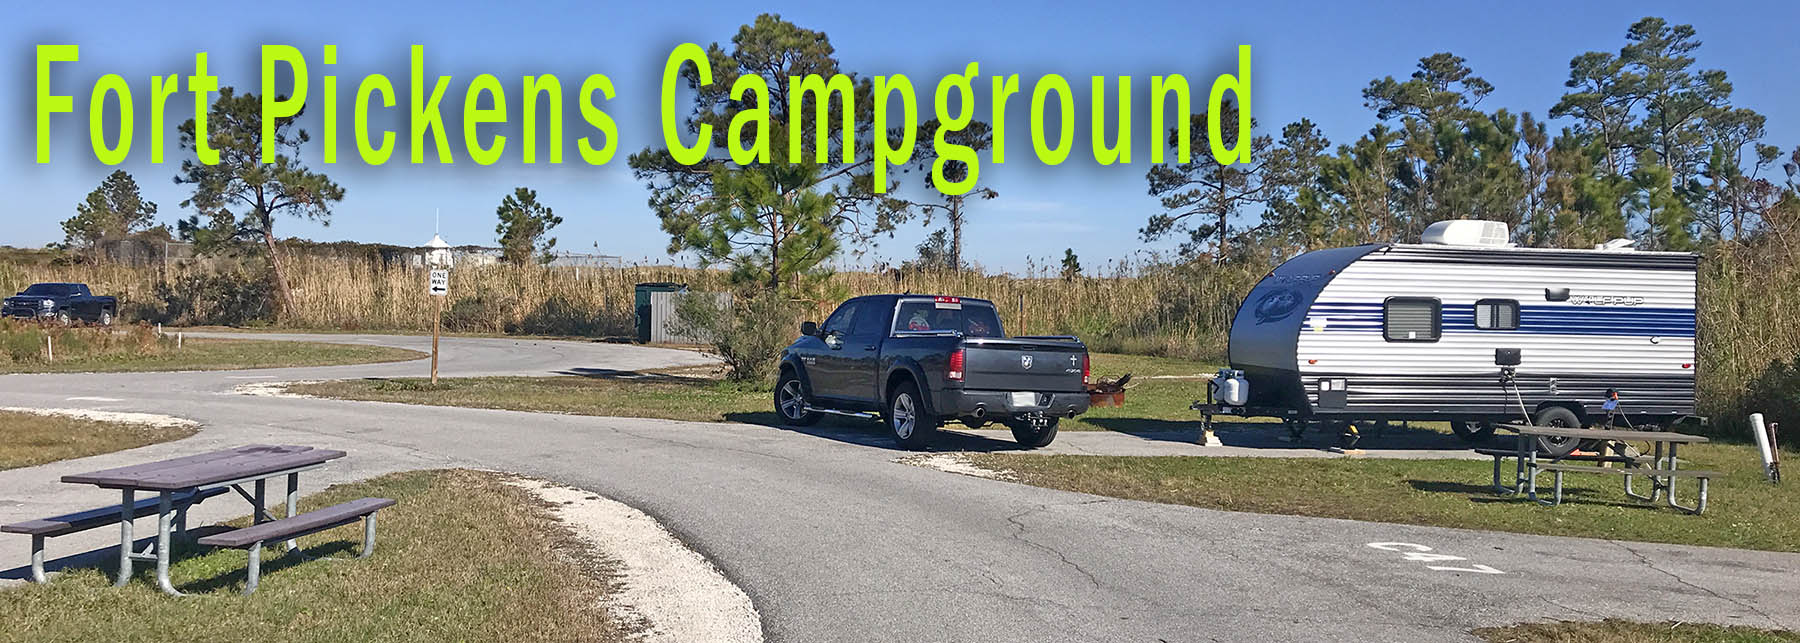 Ft Pickens Campground Featured Image